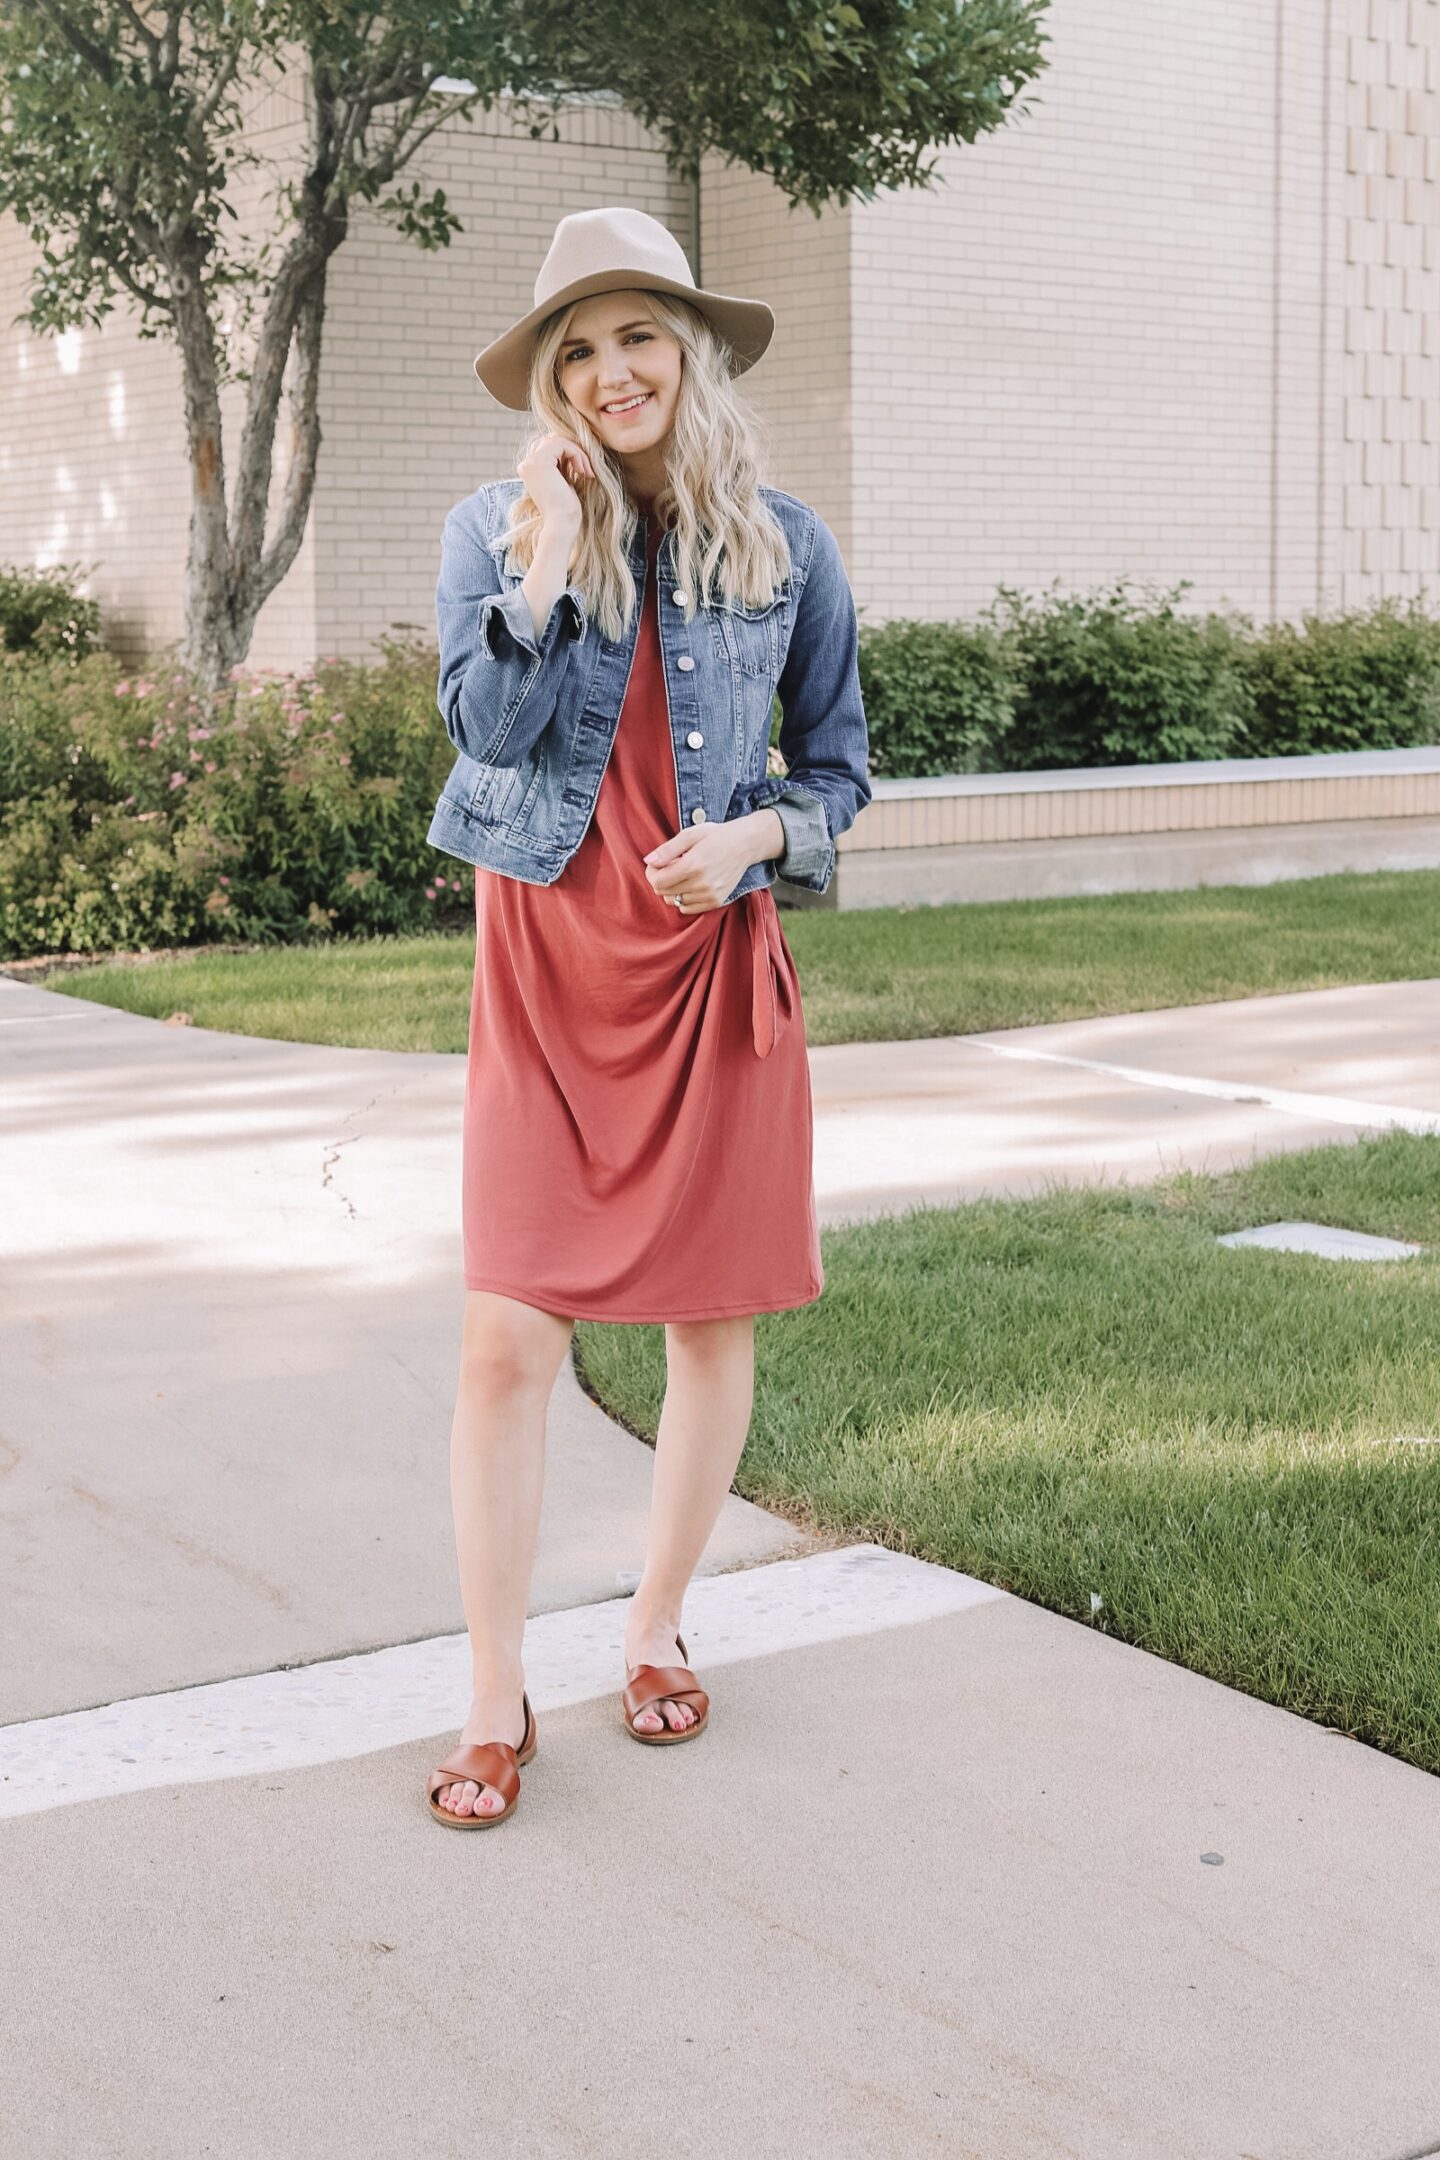 styling 1 dress in 5 ways for summer and fall